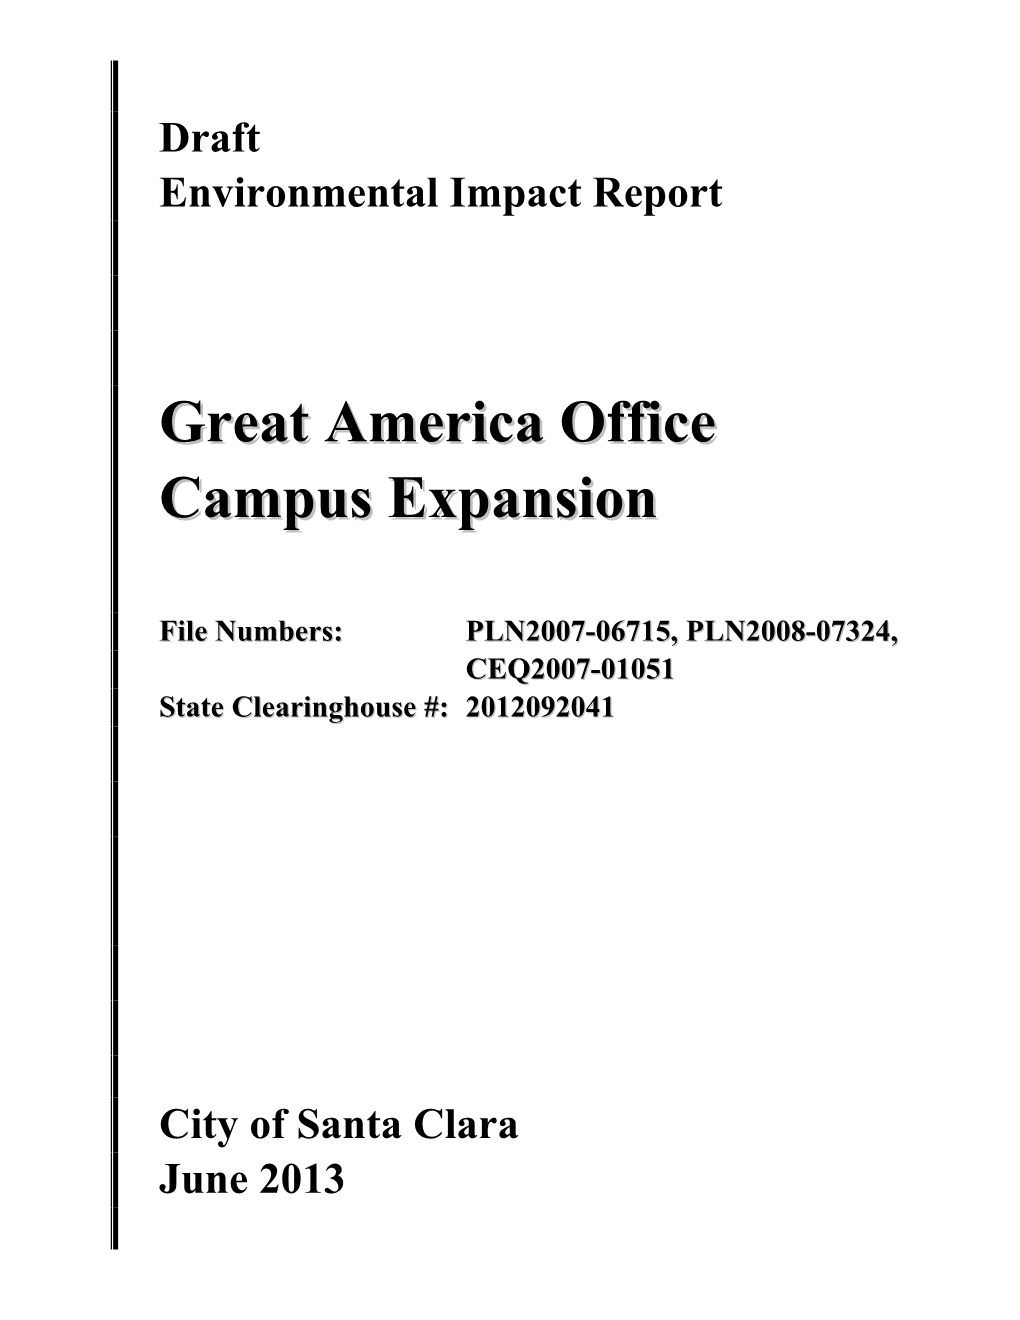 Great America Office Campus Expansion 1 Draft EIR City of Santa Clara June 2013 Table of Contents